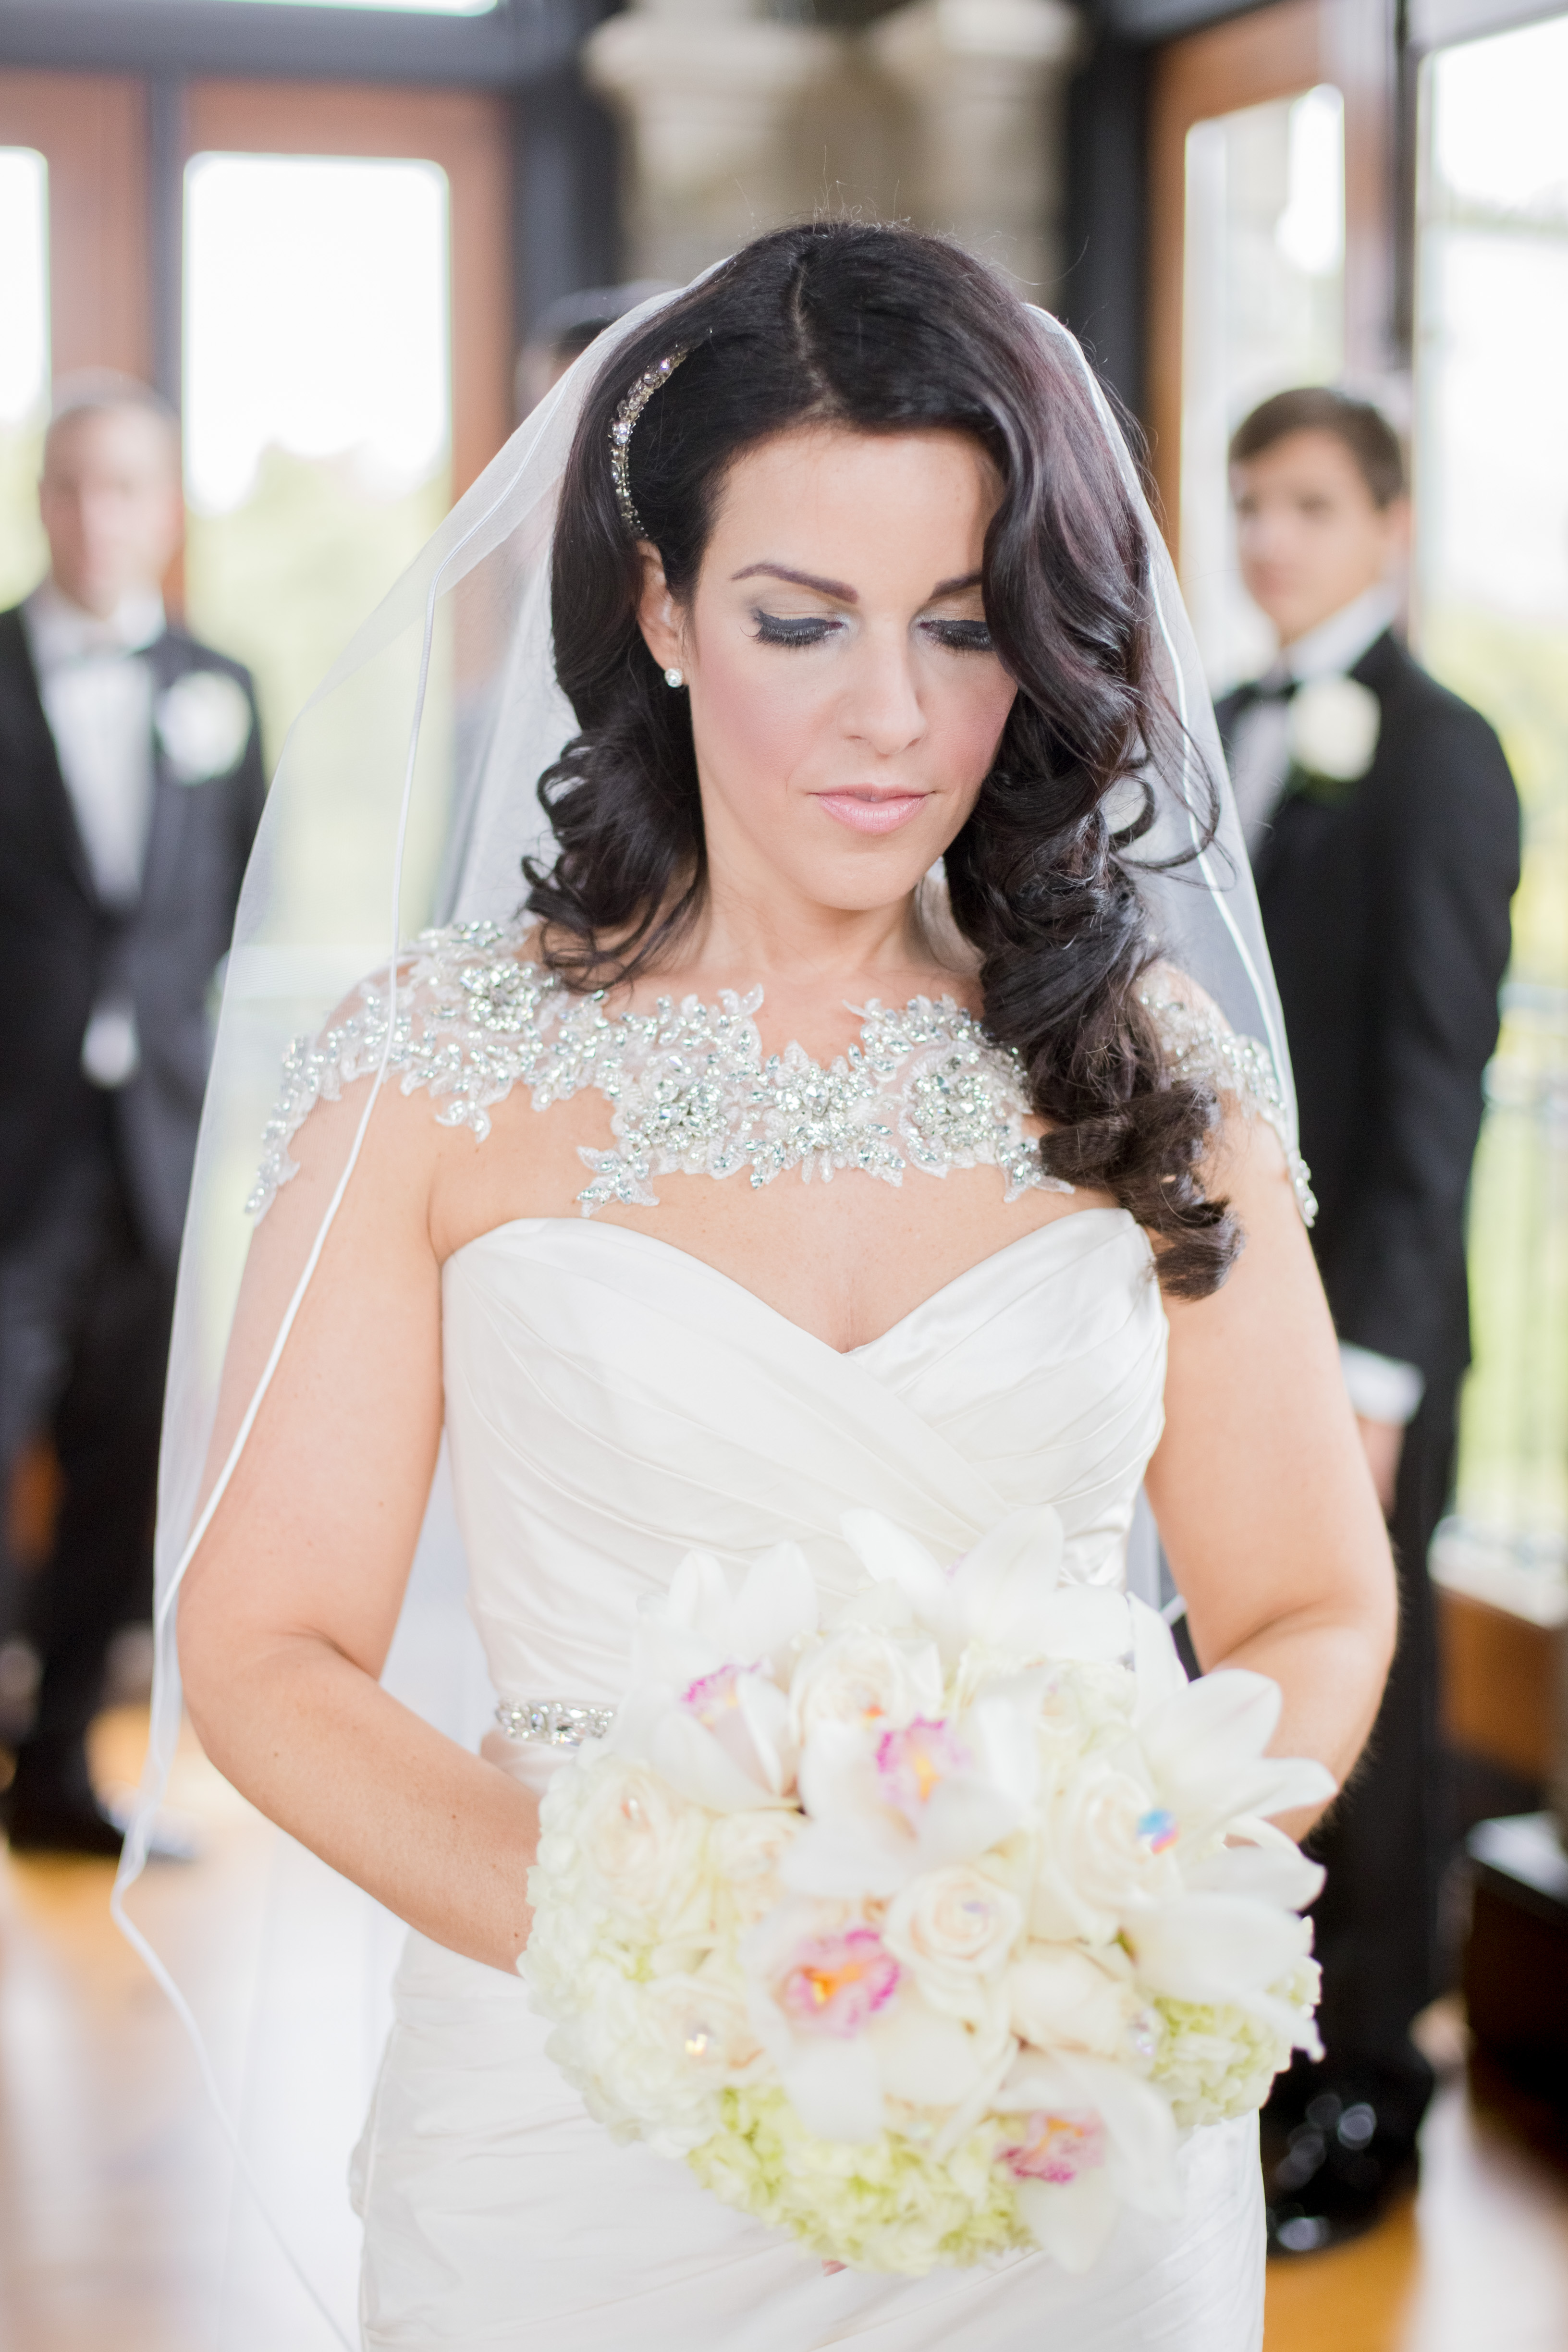 How to Find the Perfect Wedding Gown